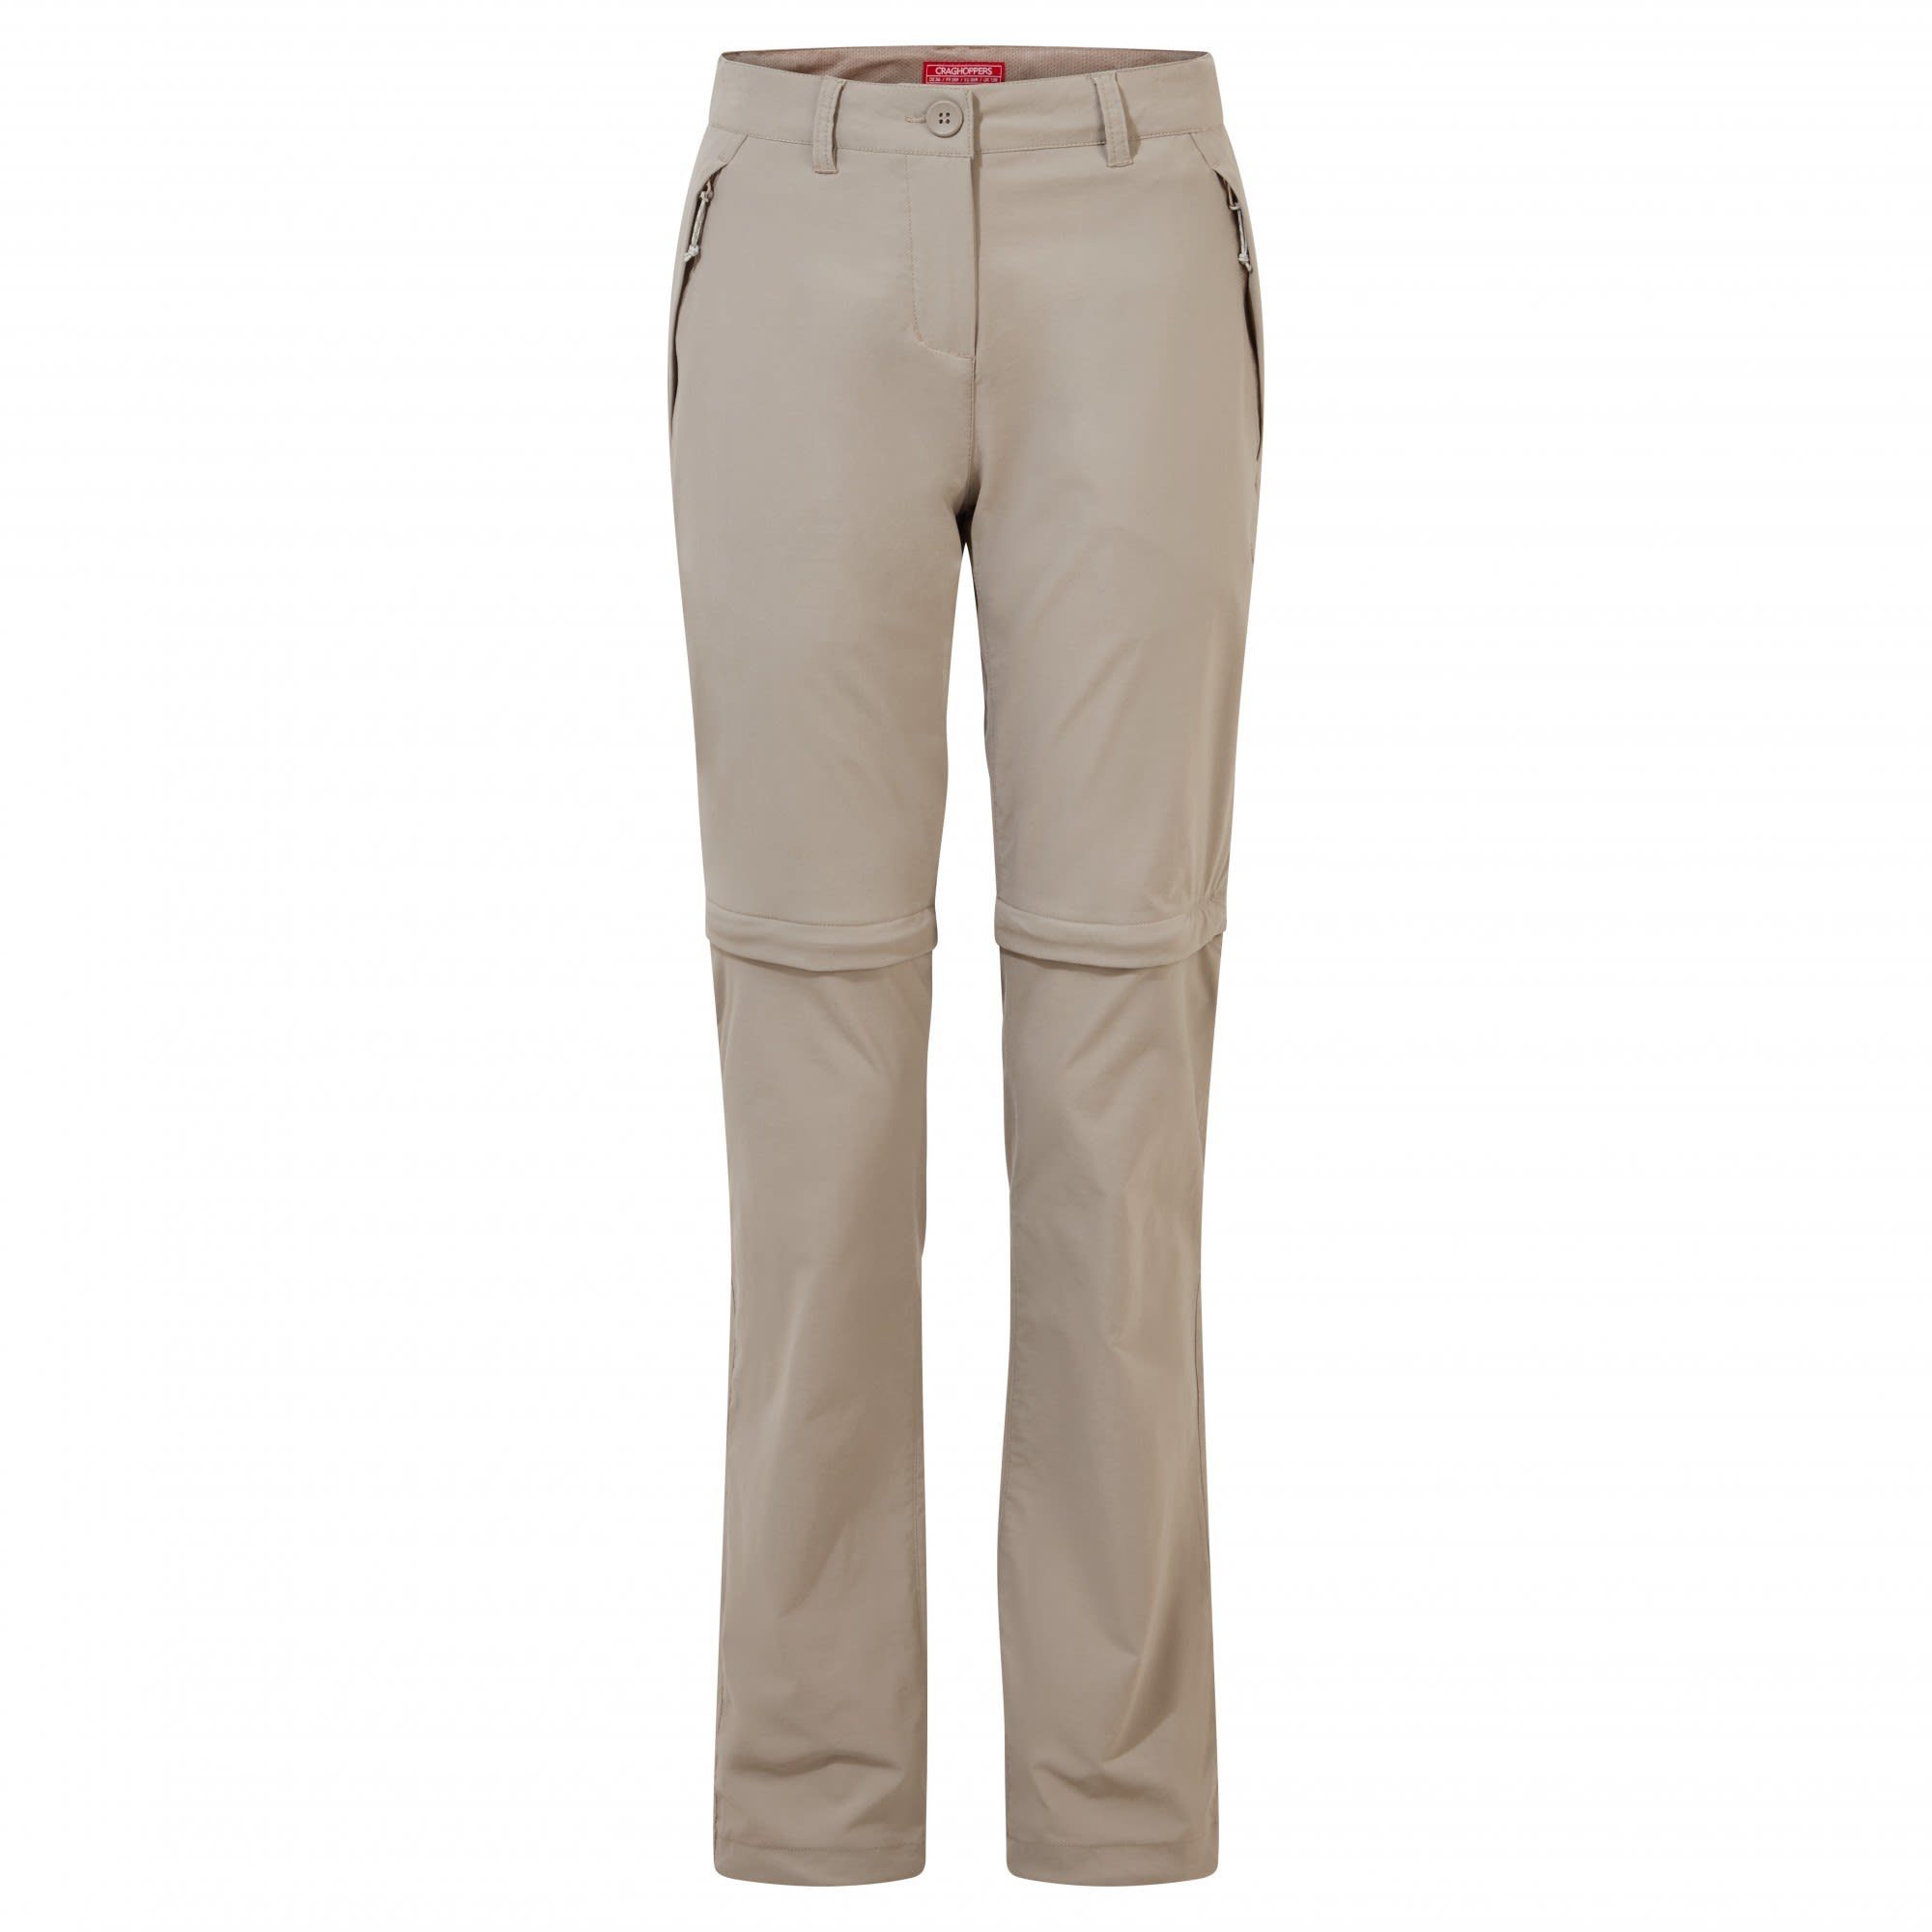 Pro W Nosilife Craghoppers Convertible Craghoppers Zip-off-Hose Trousers